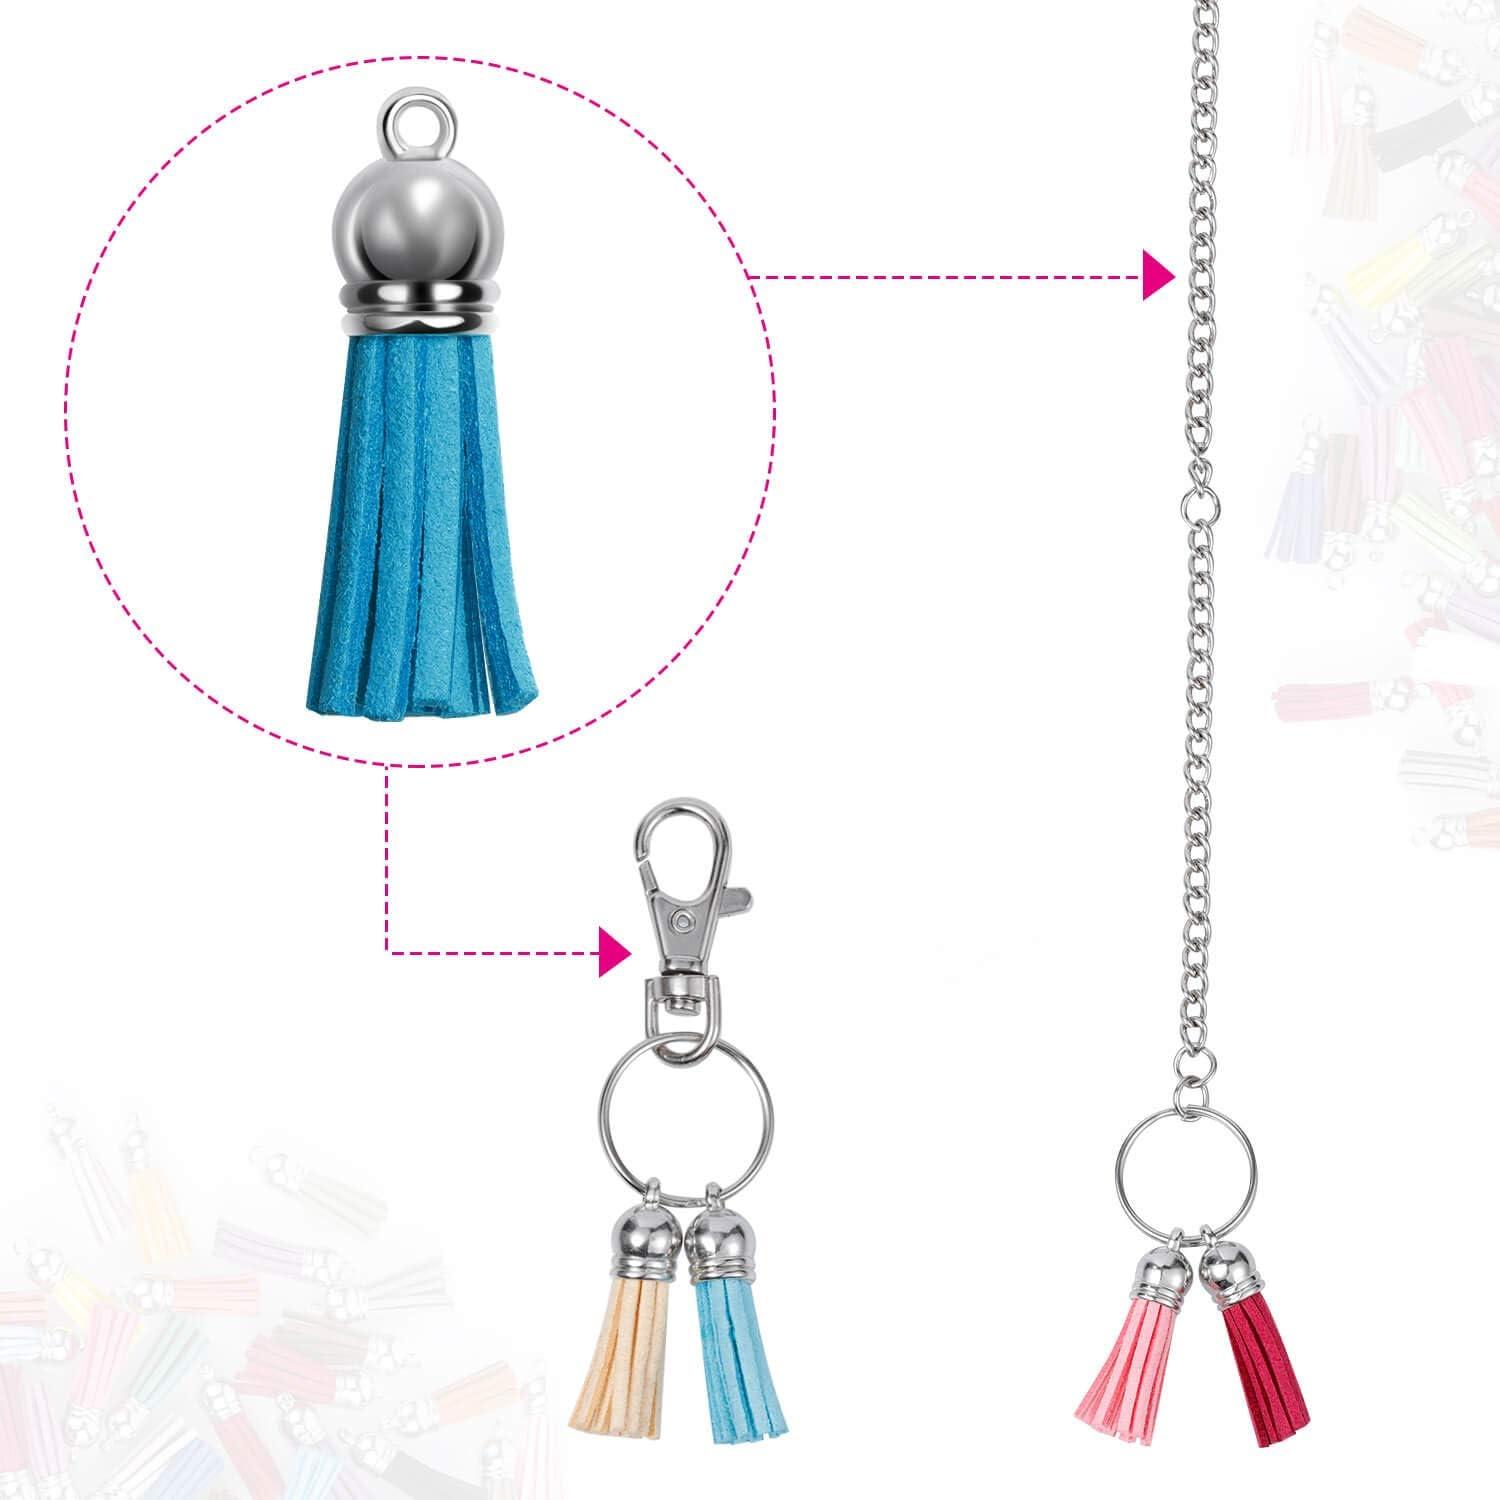 240Pcs Acrylic Keychain Blanks with Keychain Ring Colorful Tassels Key  Chain Making Kit for DIY Keychain